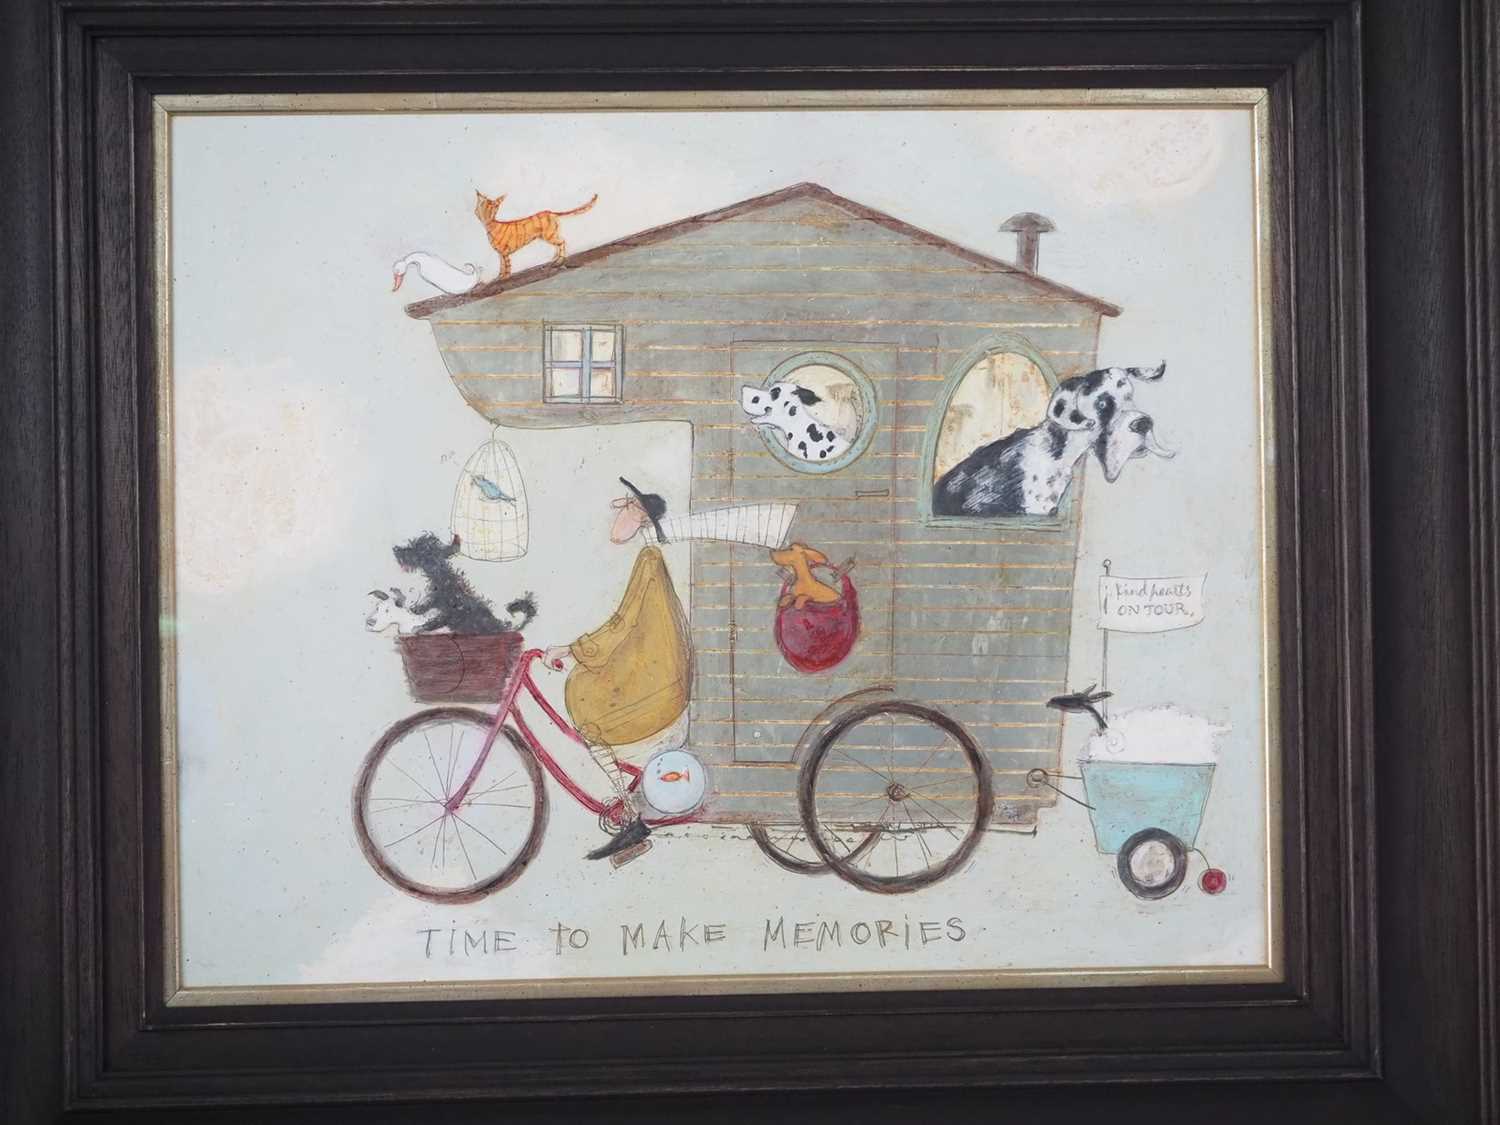 Sam Toft 'TIME TO MAKE MEMORIES' - mixed media and sgraffito on acid free board - signed -